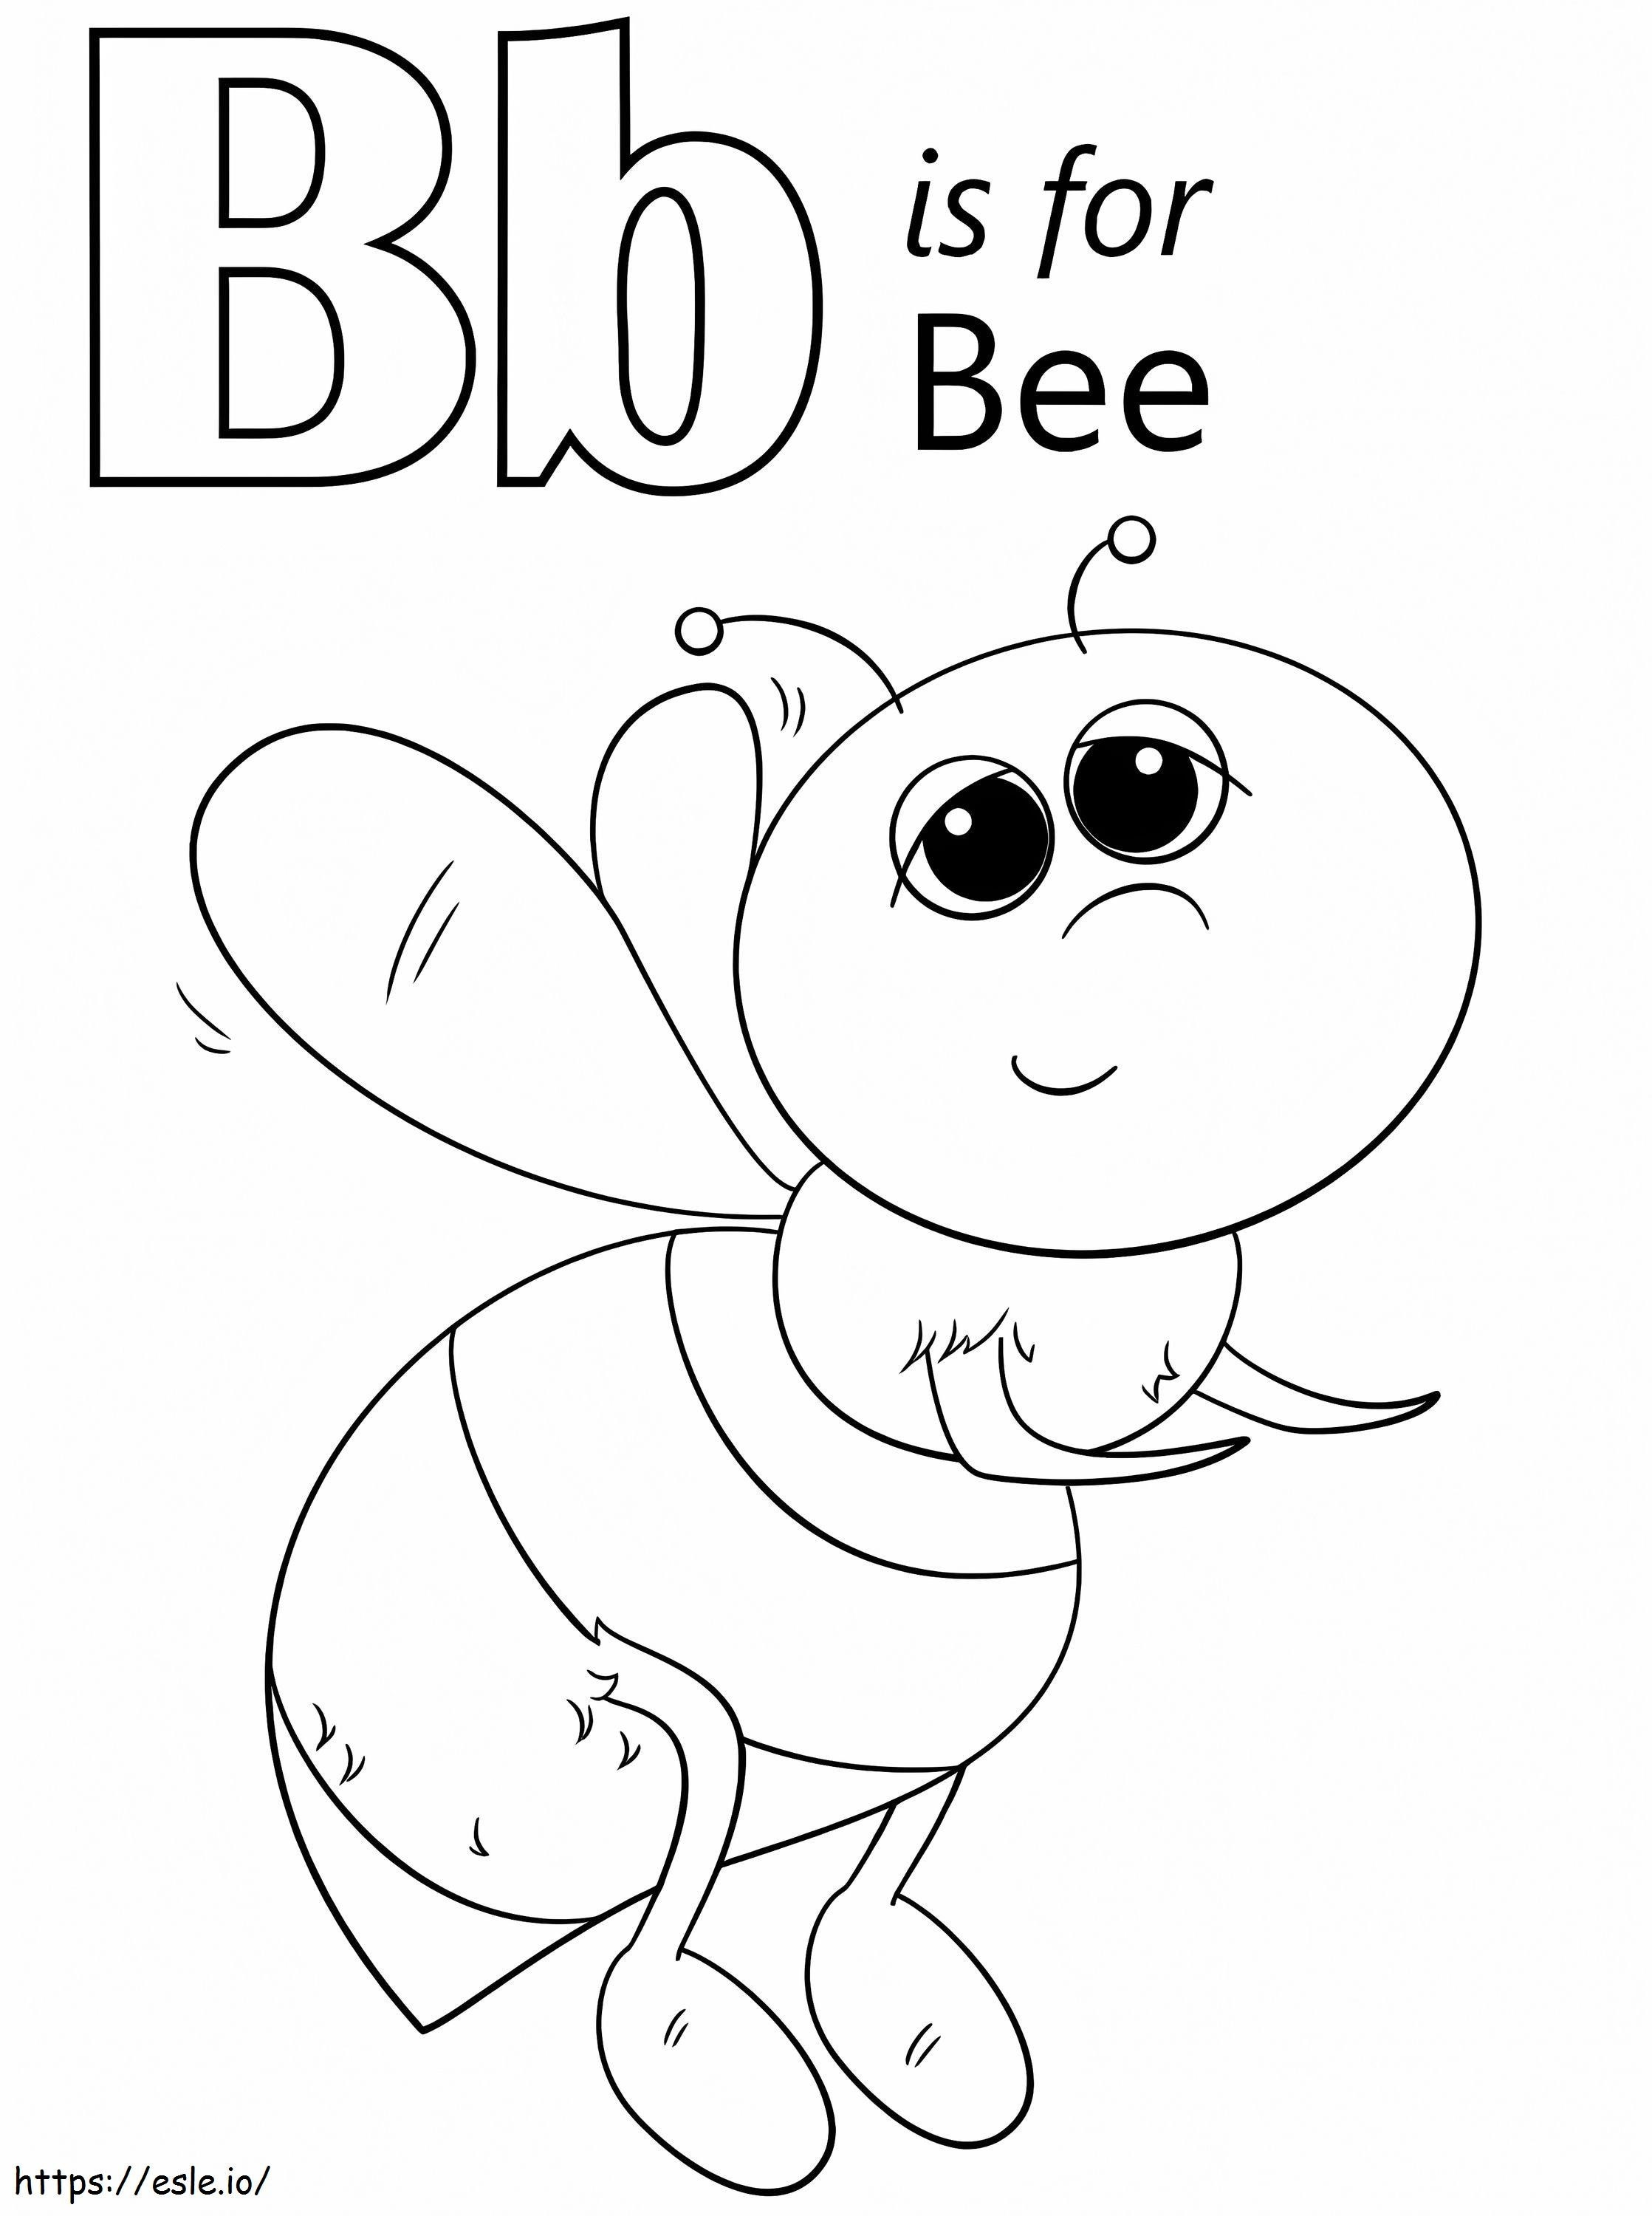 Bee Letter B coloring page